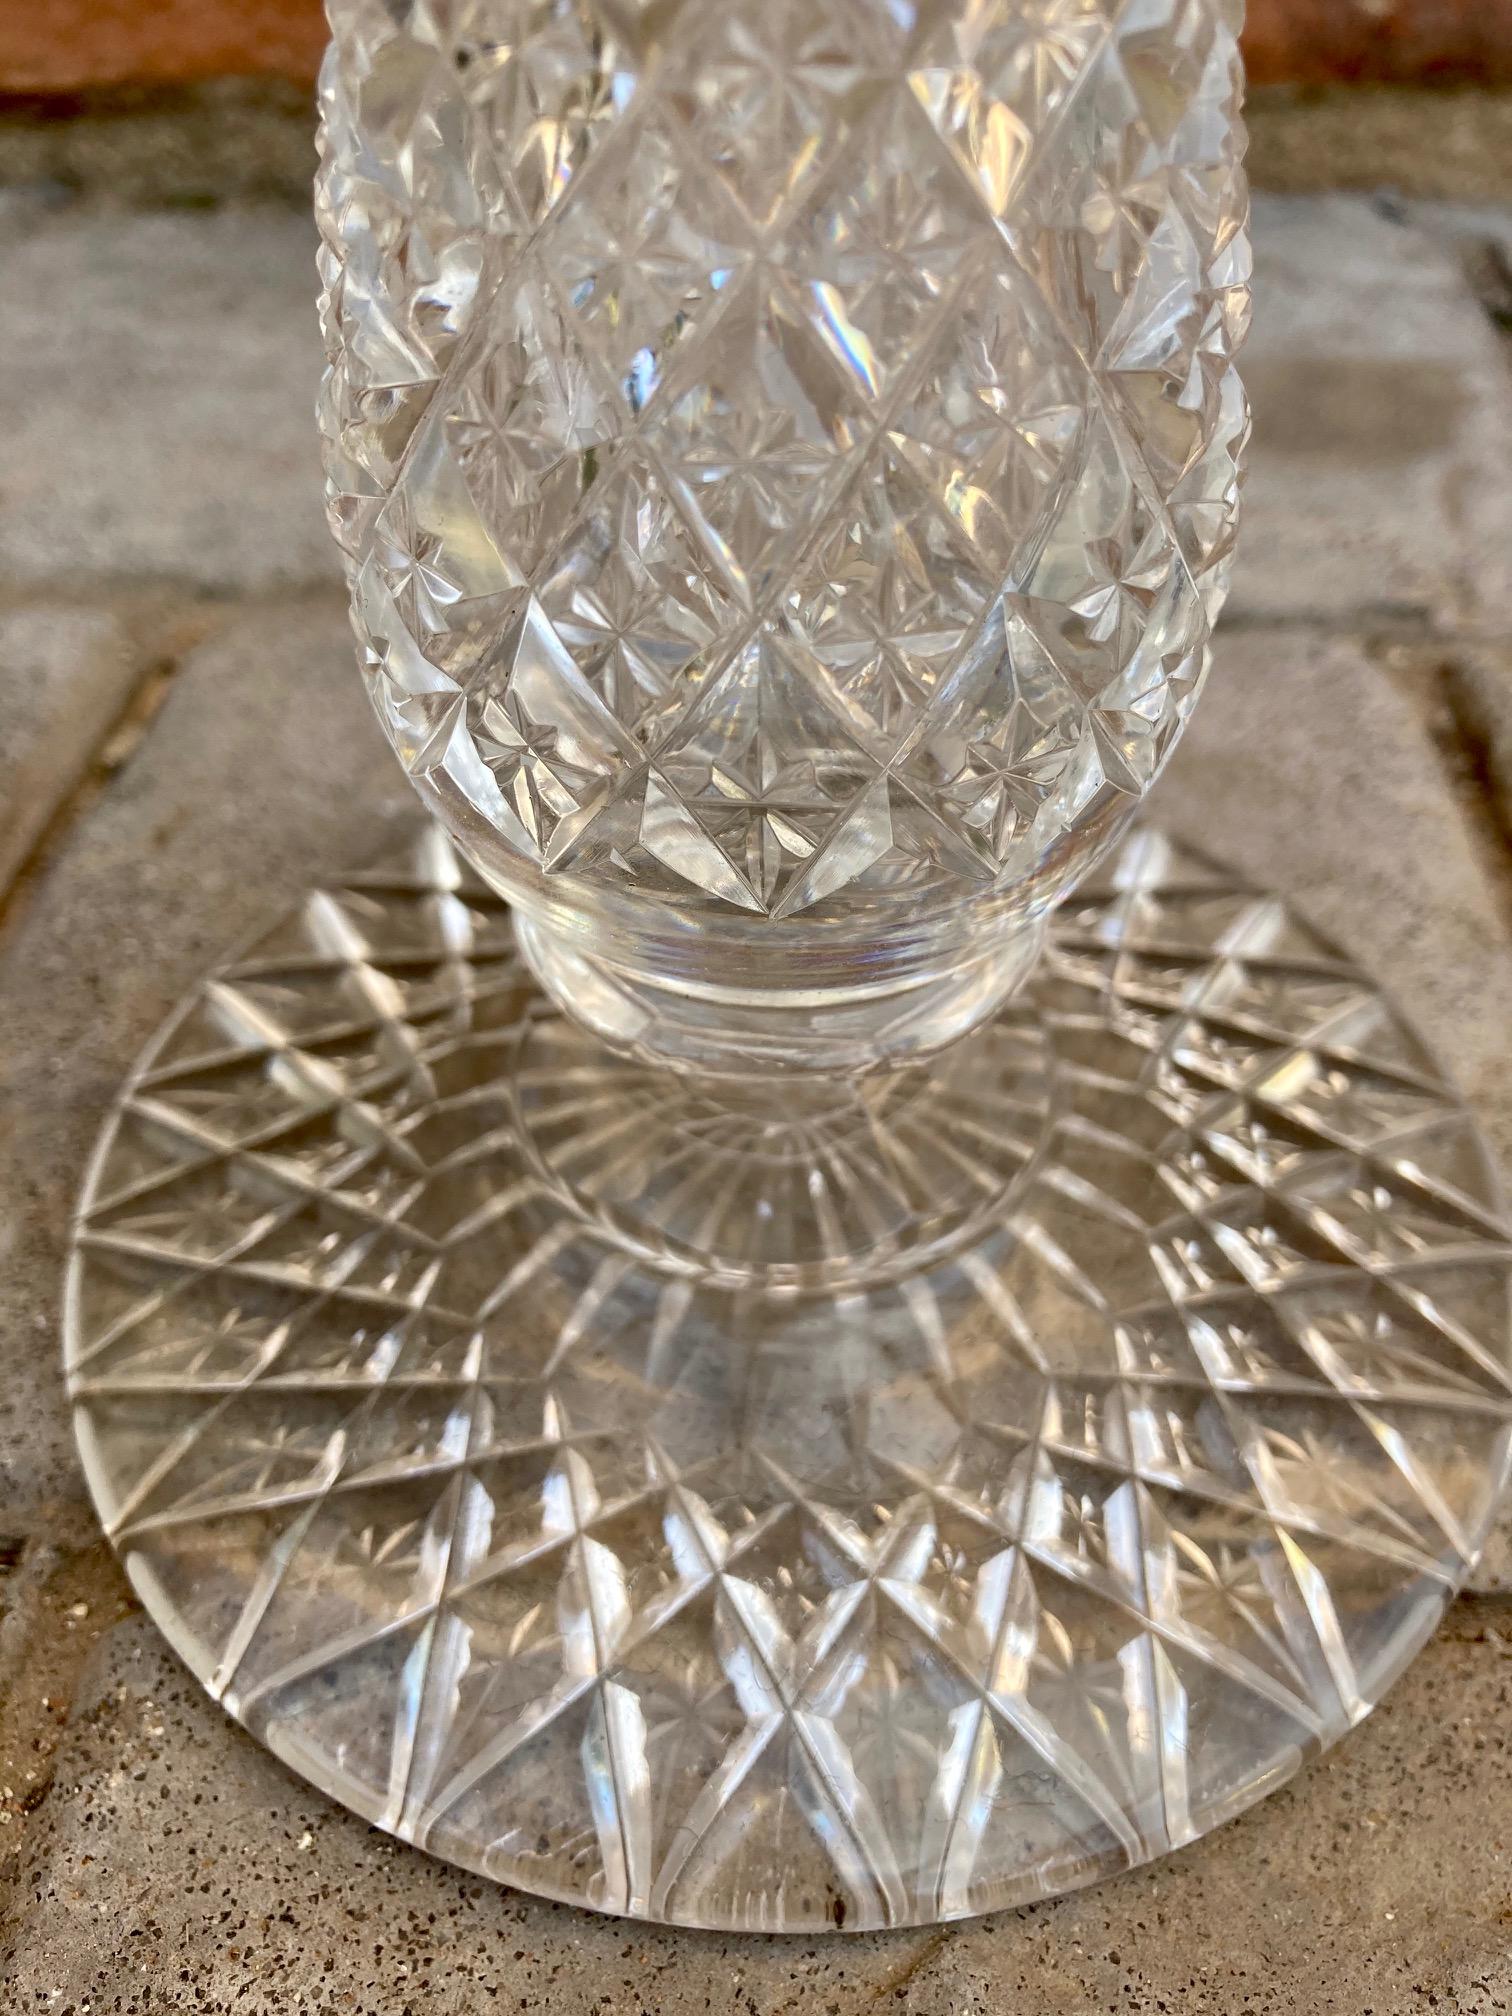 Late XIX Victorian Cut Glass Candleholder in Brass from Cricklite Clarke Trade For Sale 2